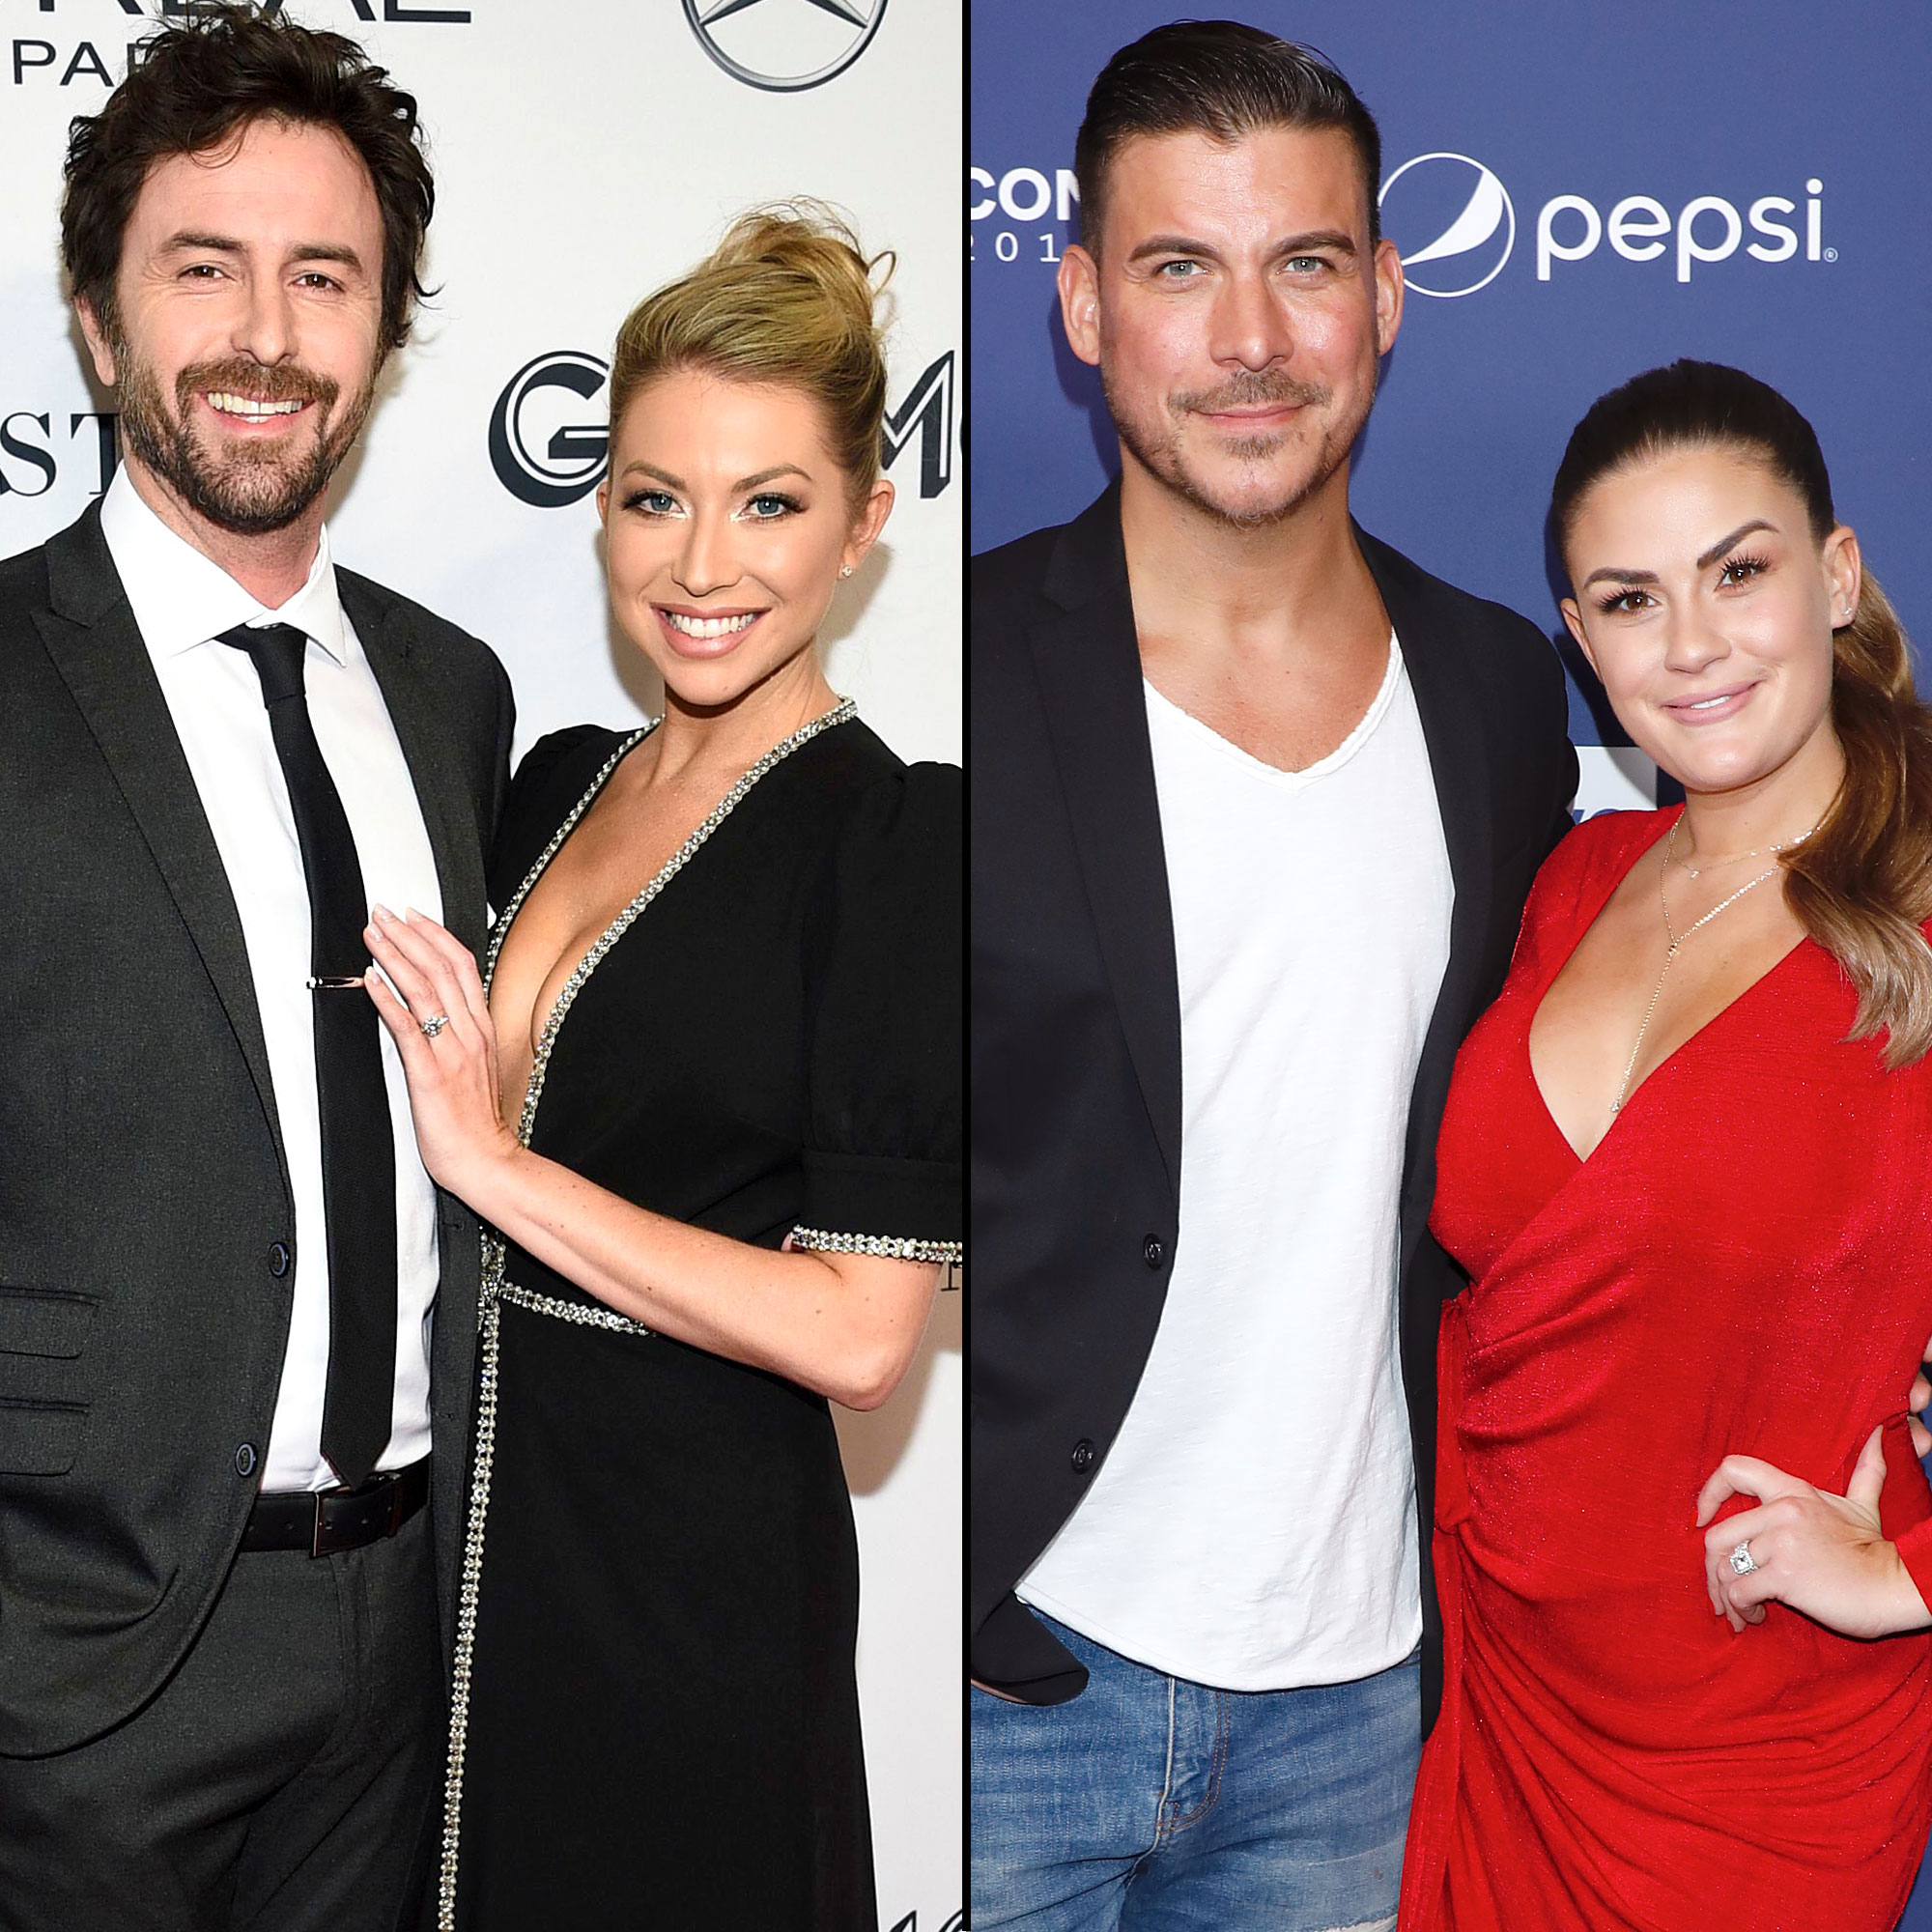 Stassi, Beaus Falling Out With Jax, Brittany What We Know photo